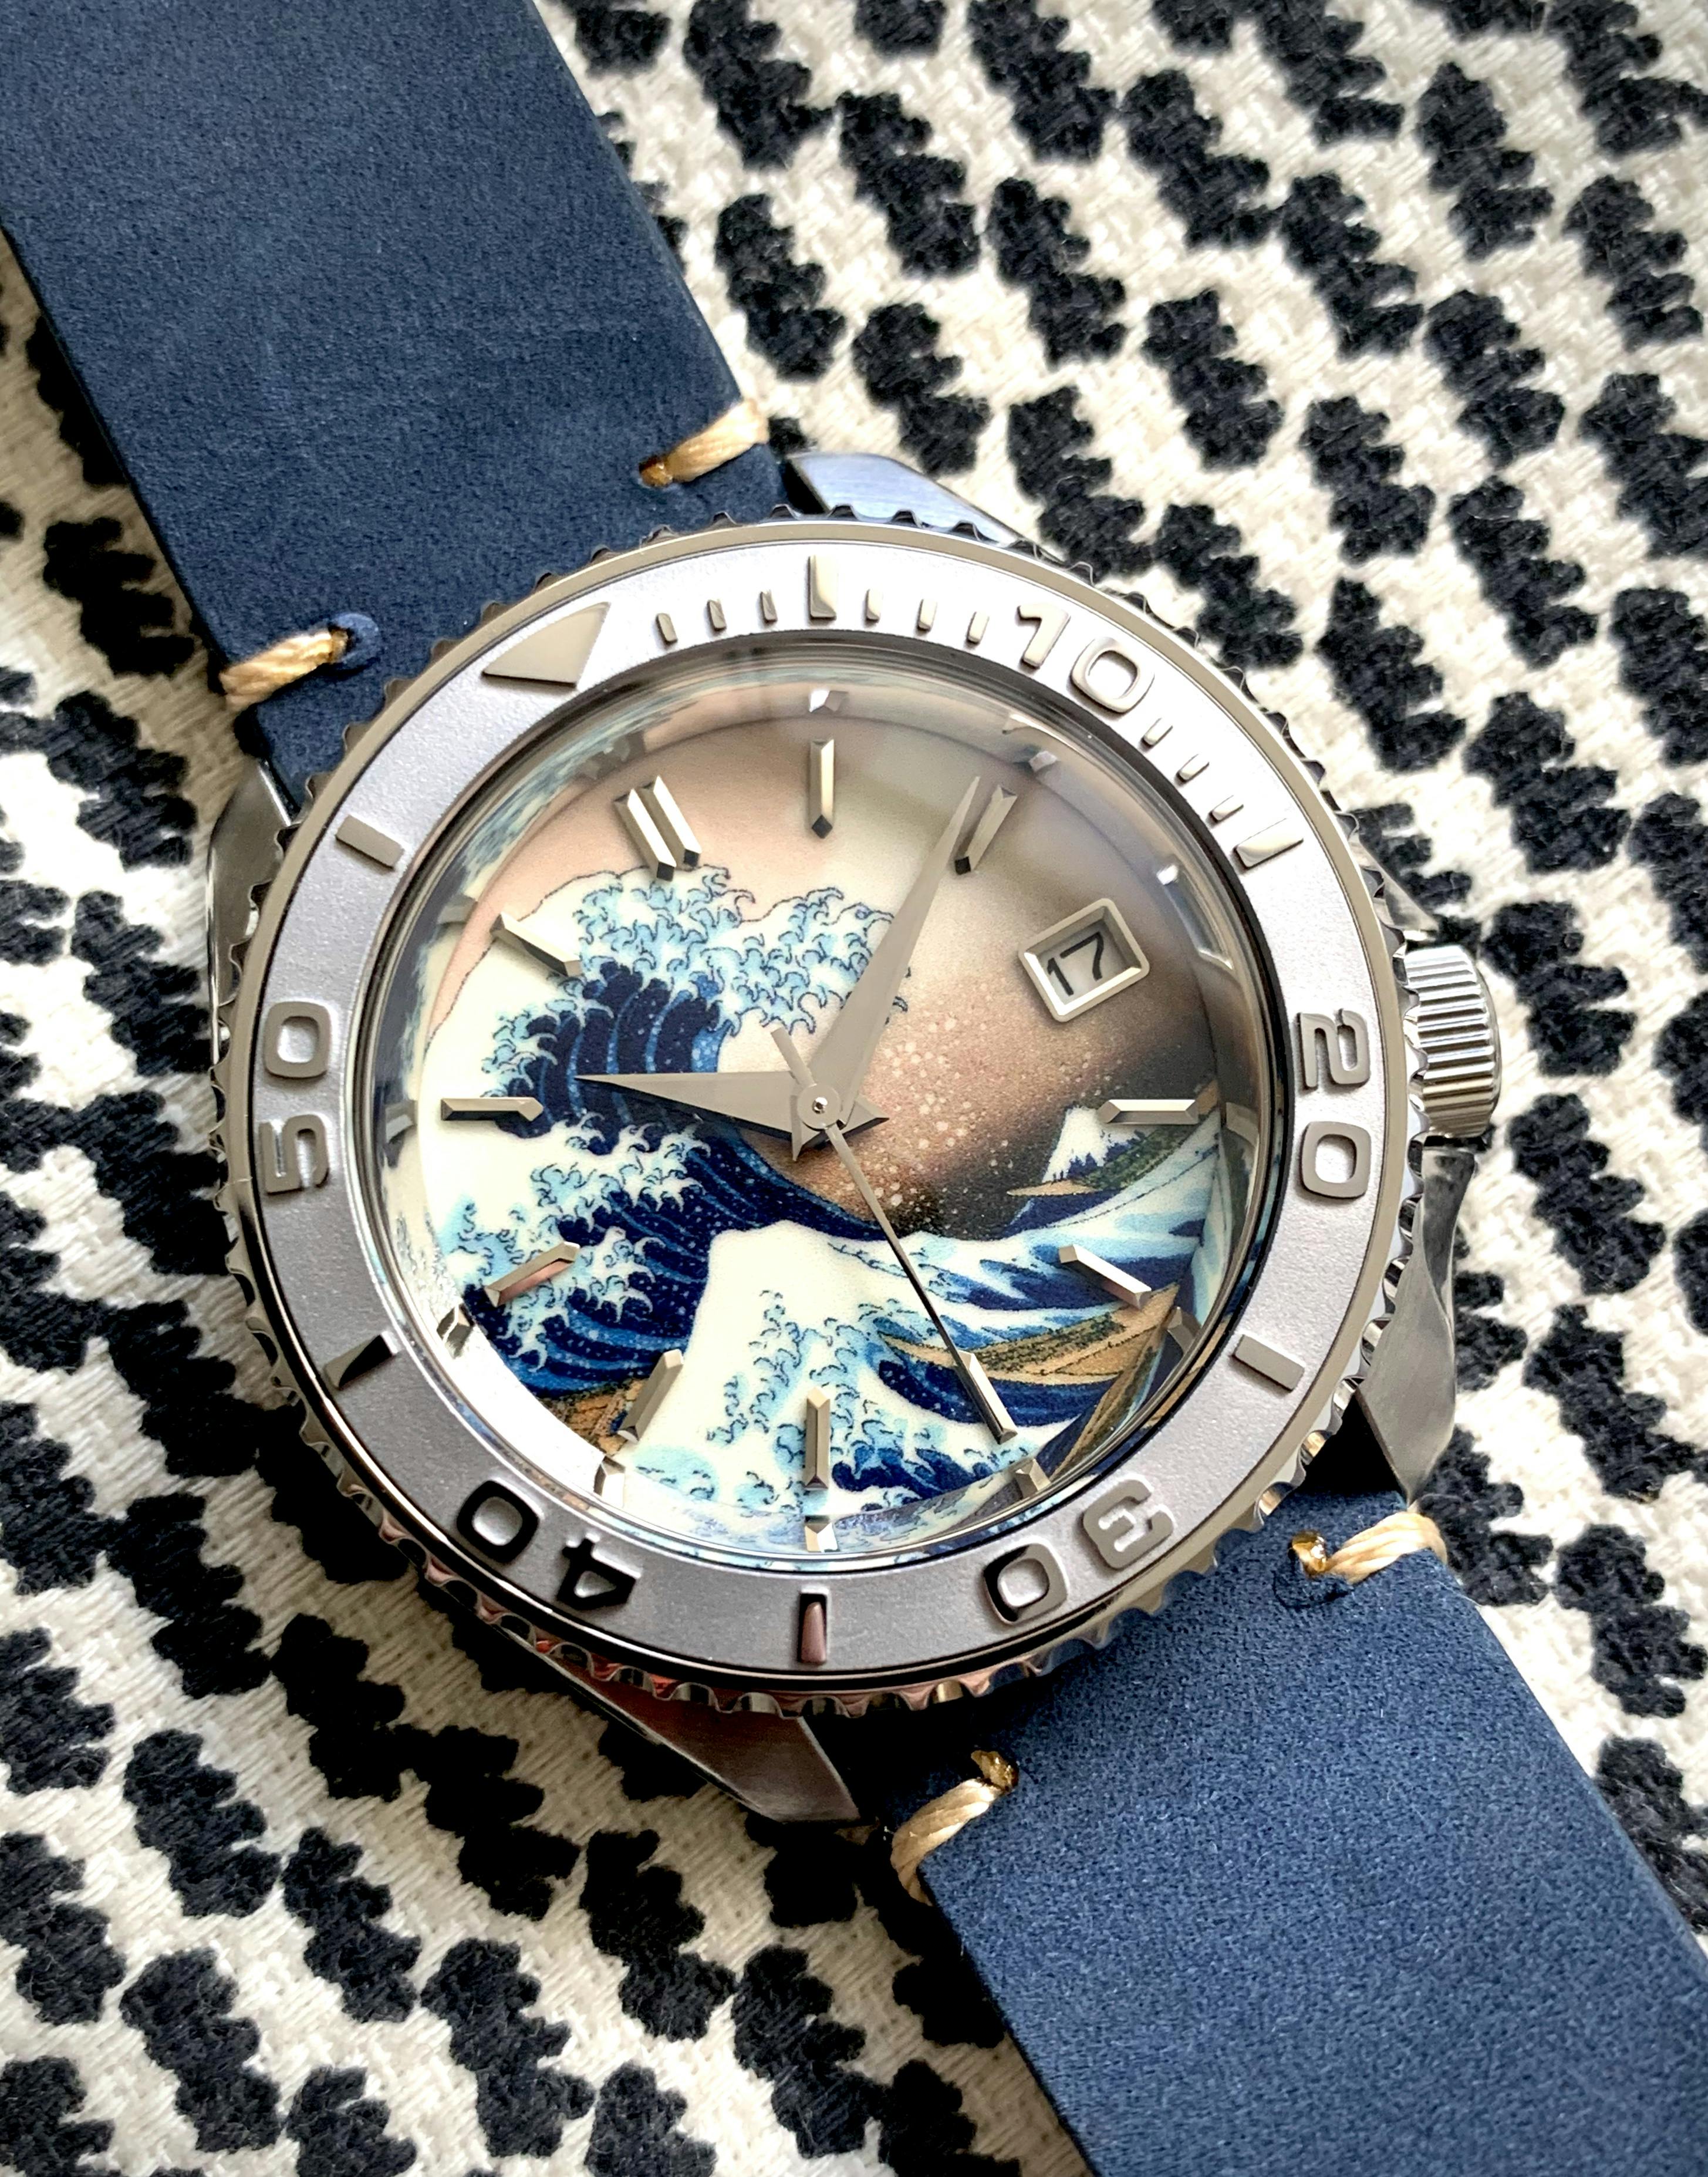 SEIKO SRPD55K1 | The Great Wave off Kanagawa Watch - Lucius Atelier